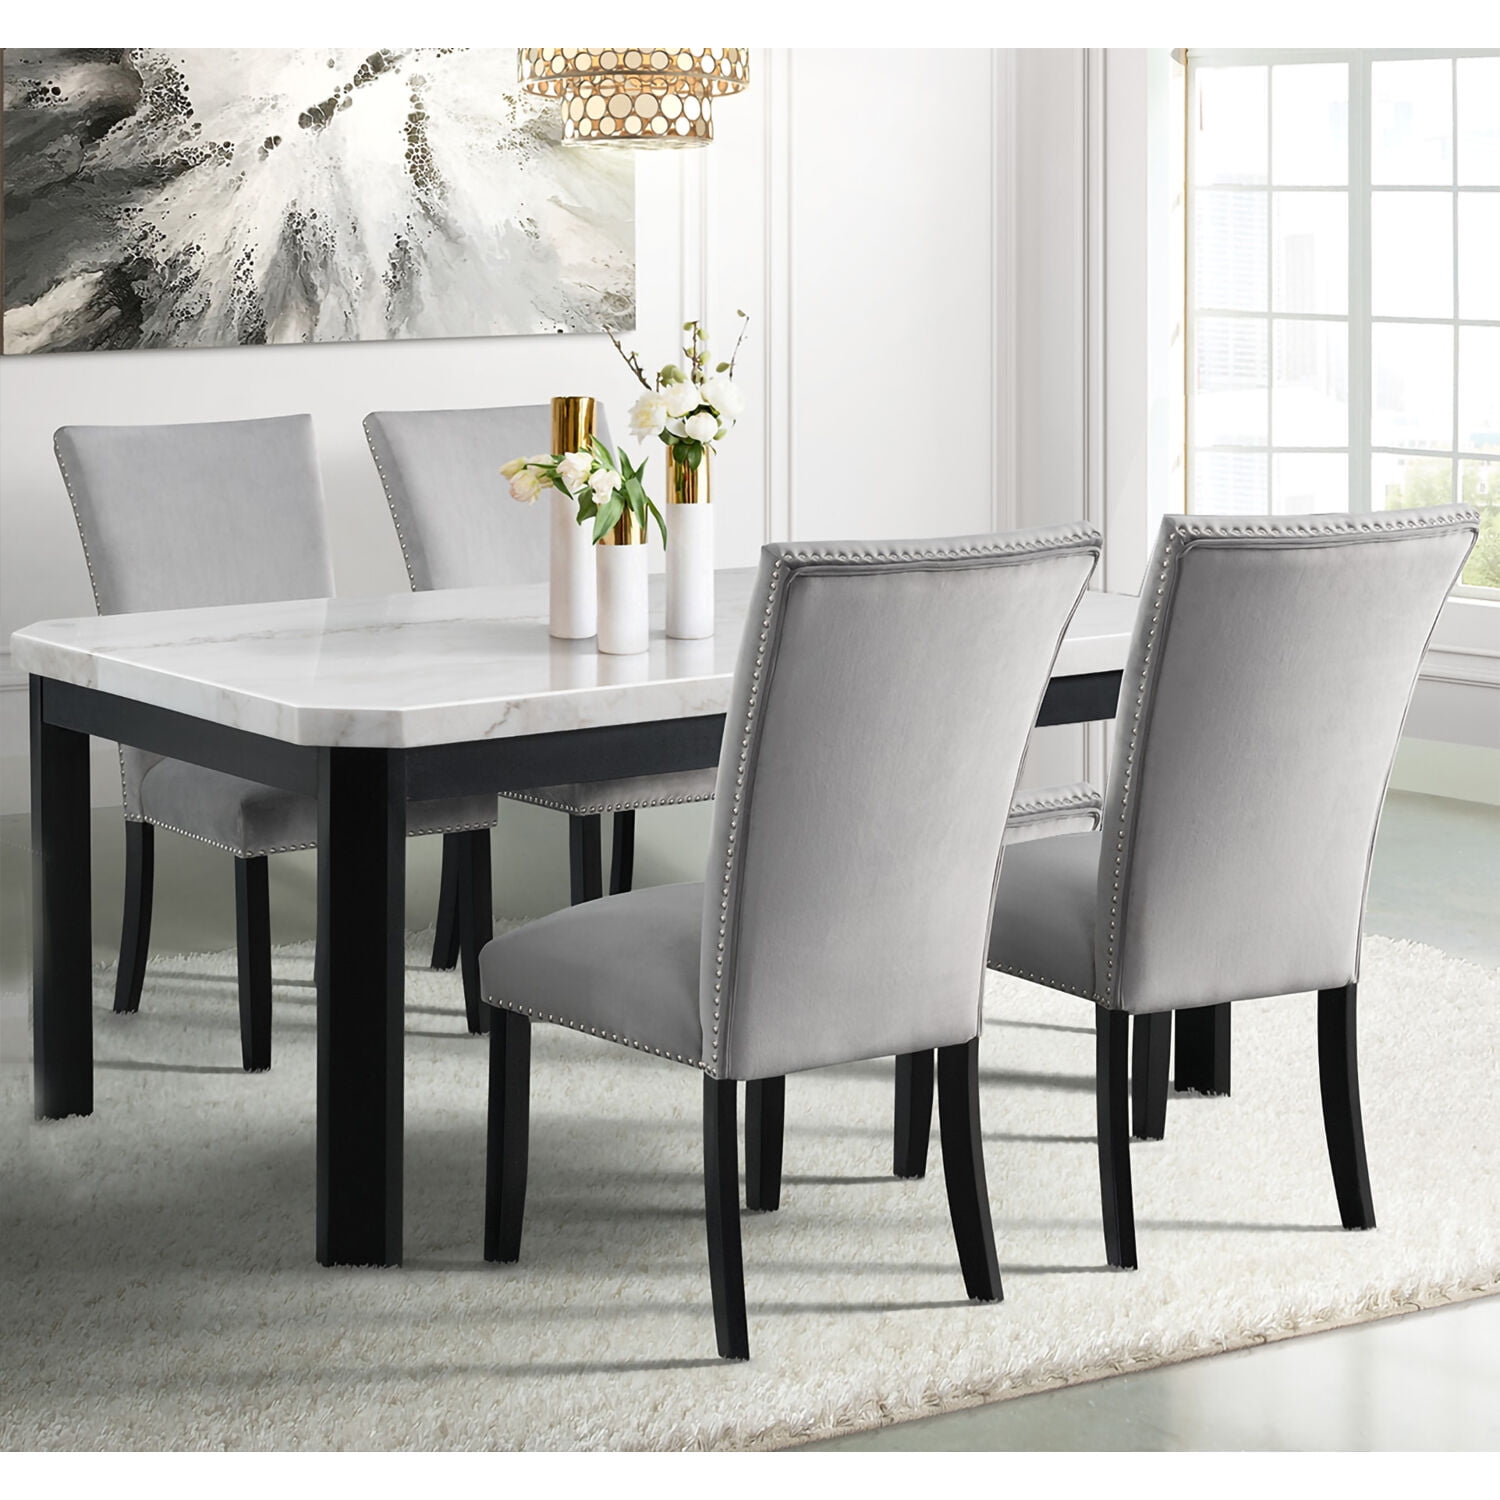 Cmf 982004-5pc-gry Solano Dining Set With Table & 5 Fabric Side Chairs, Gray - 5 Piece